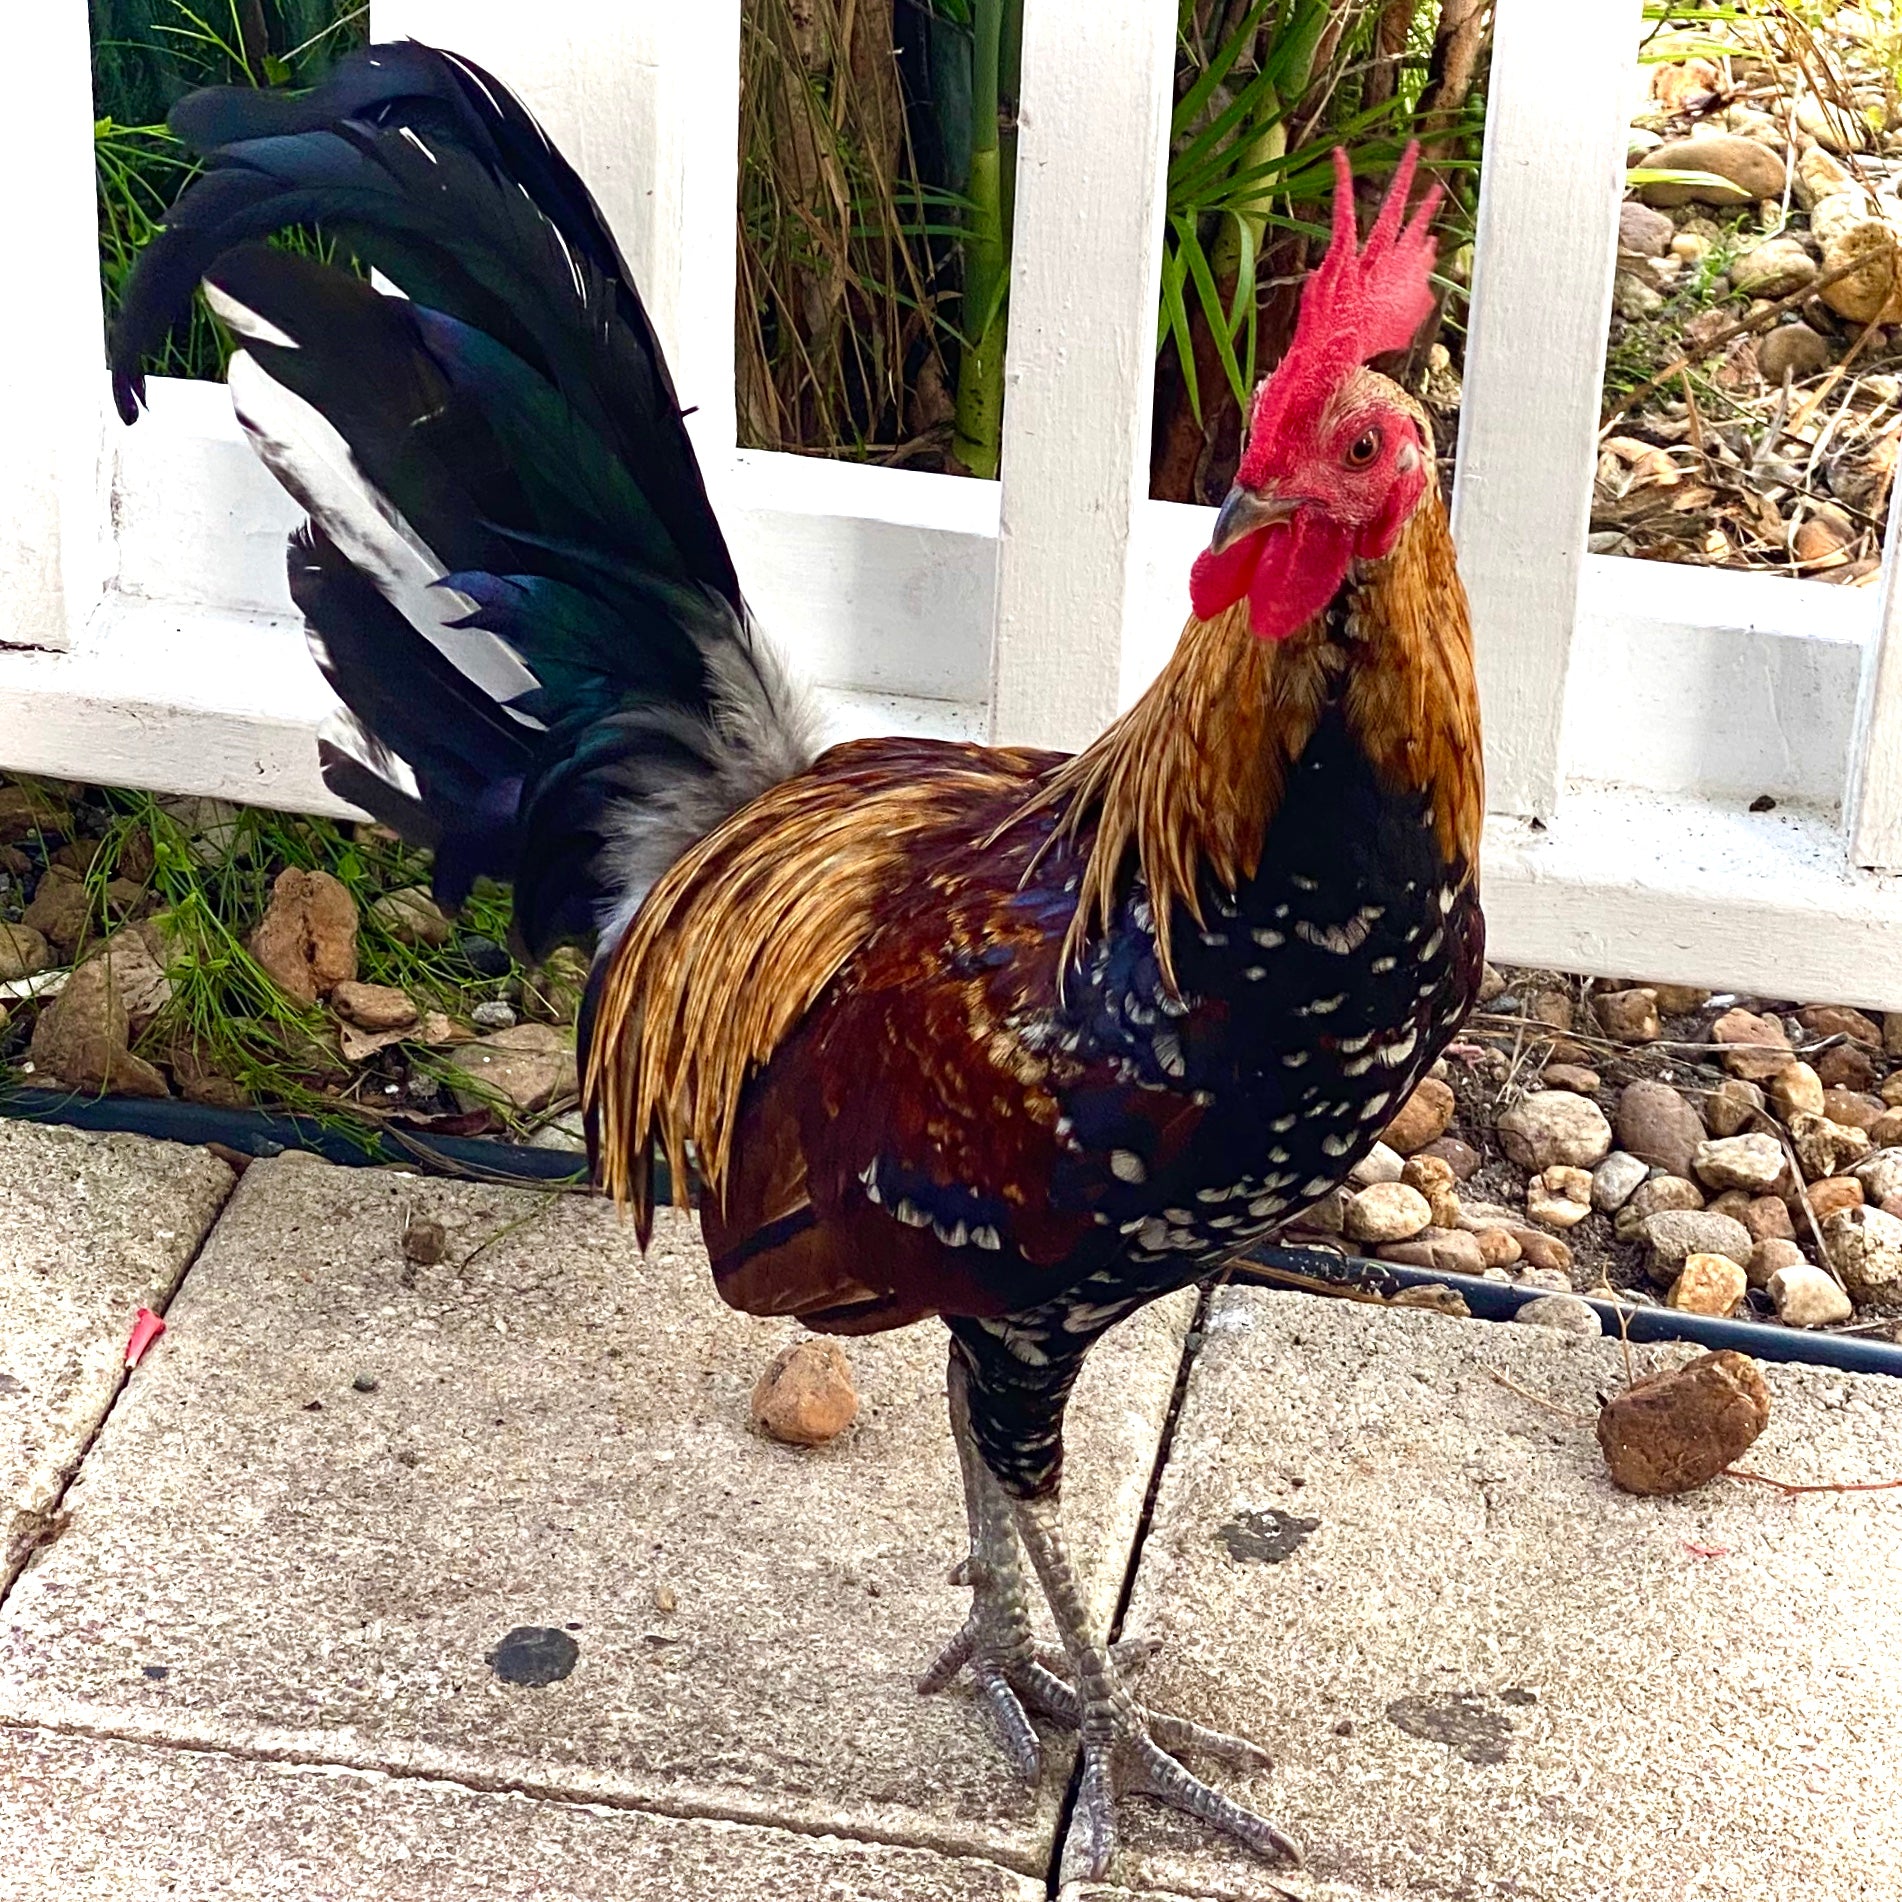 Why are there so many chickens on the streets of Key West?